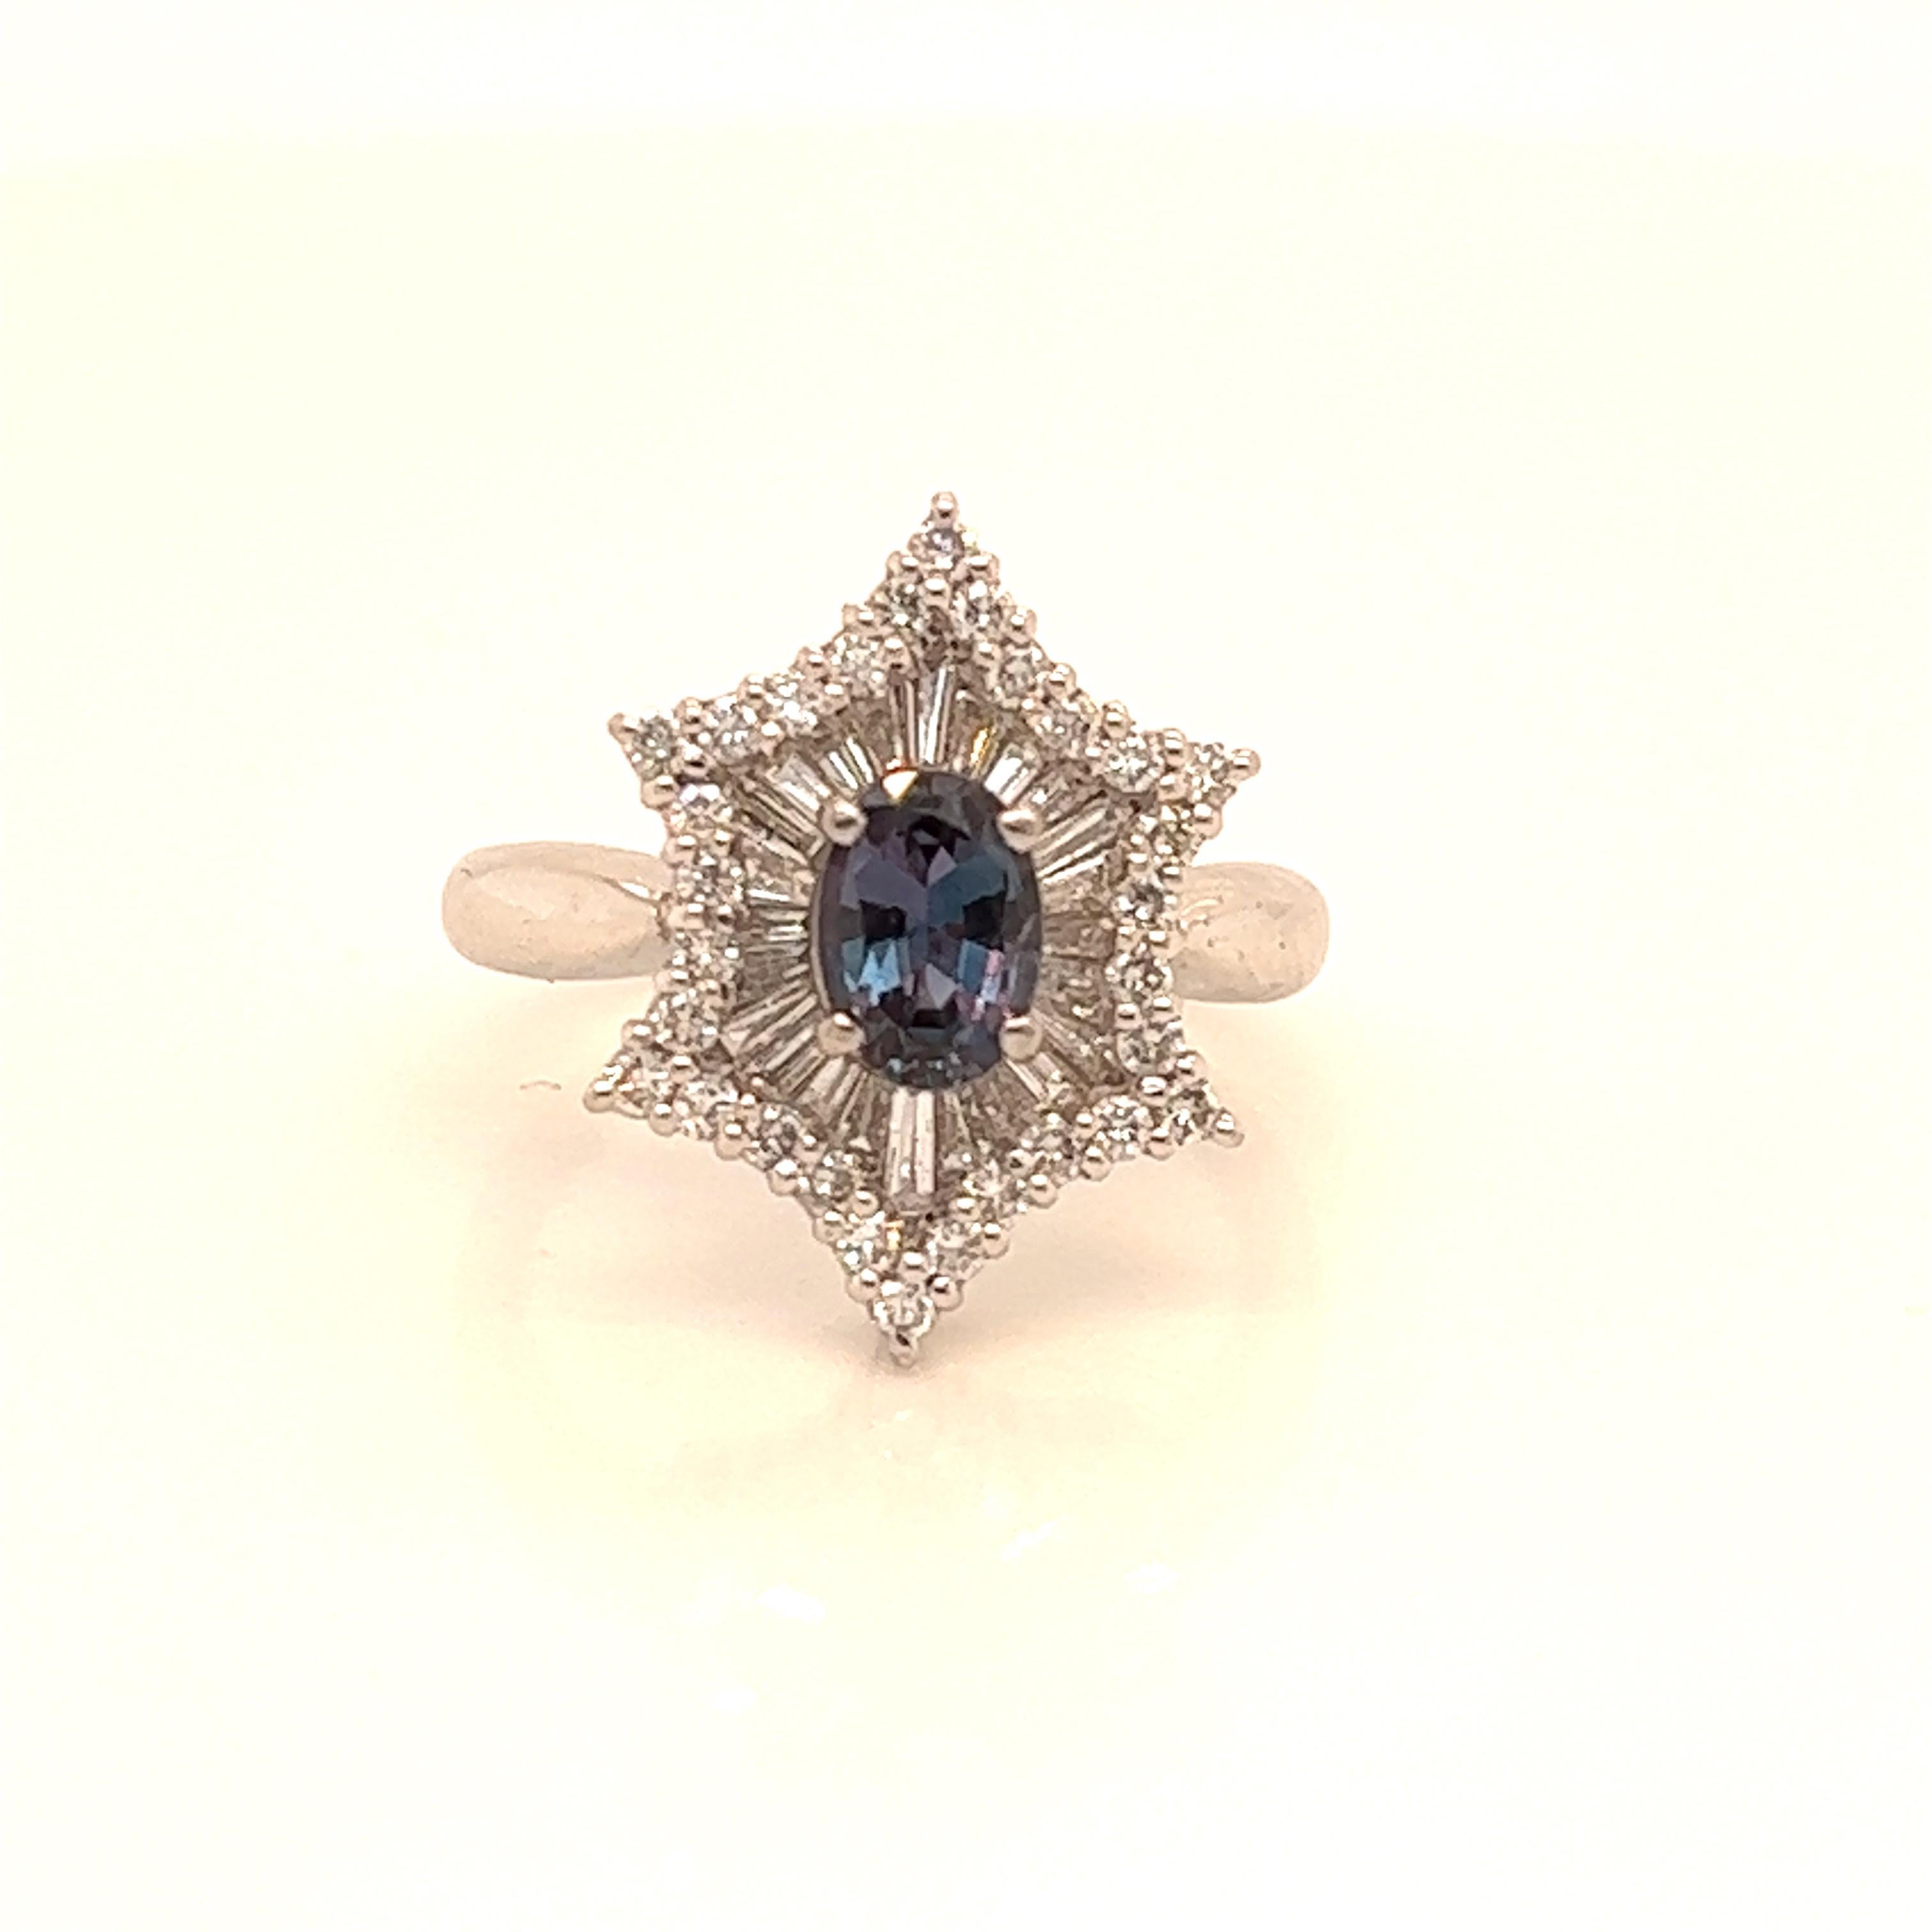 This is a gorgeous natural AAA quality Oval Alexandrite surrounded by dainty diamonds that is set in a vintage platinum setting. This ring features a natural 0.76 carat oval alexandrite that is certified by the Gemological Institute of America (GIA)